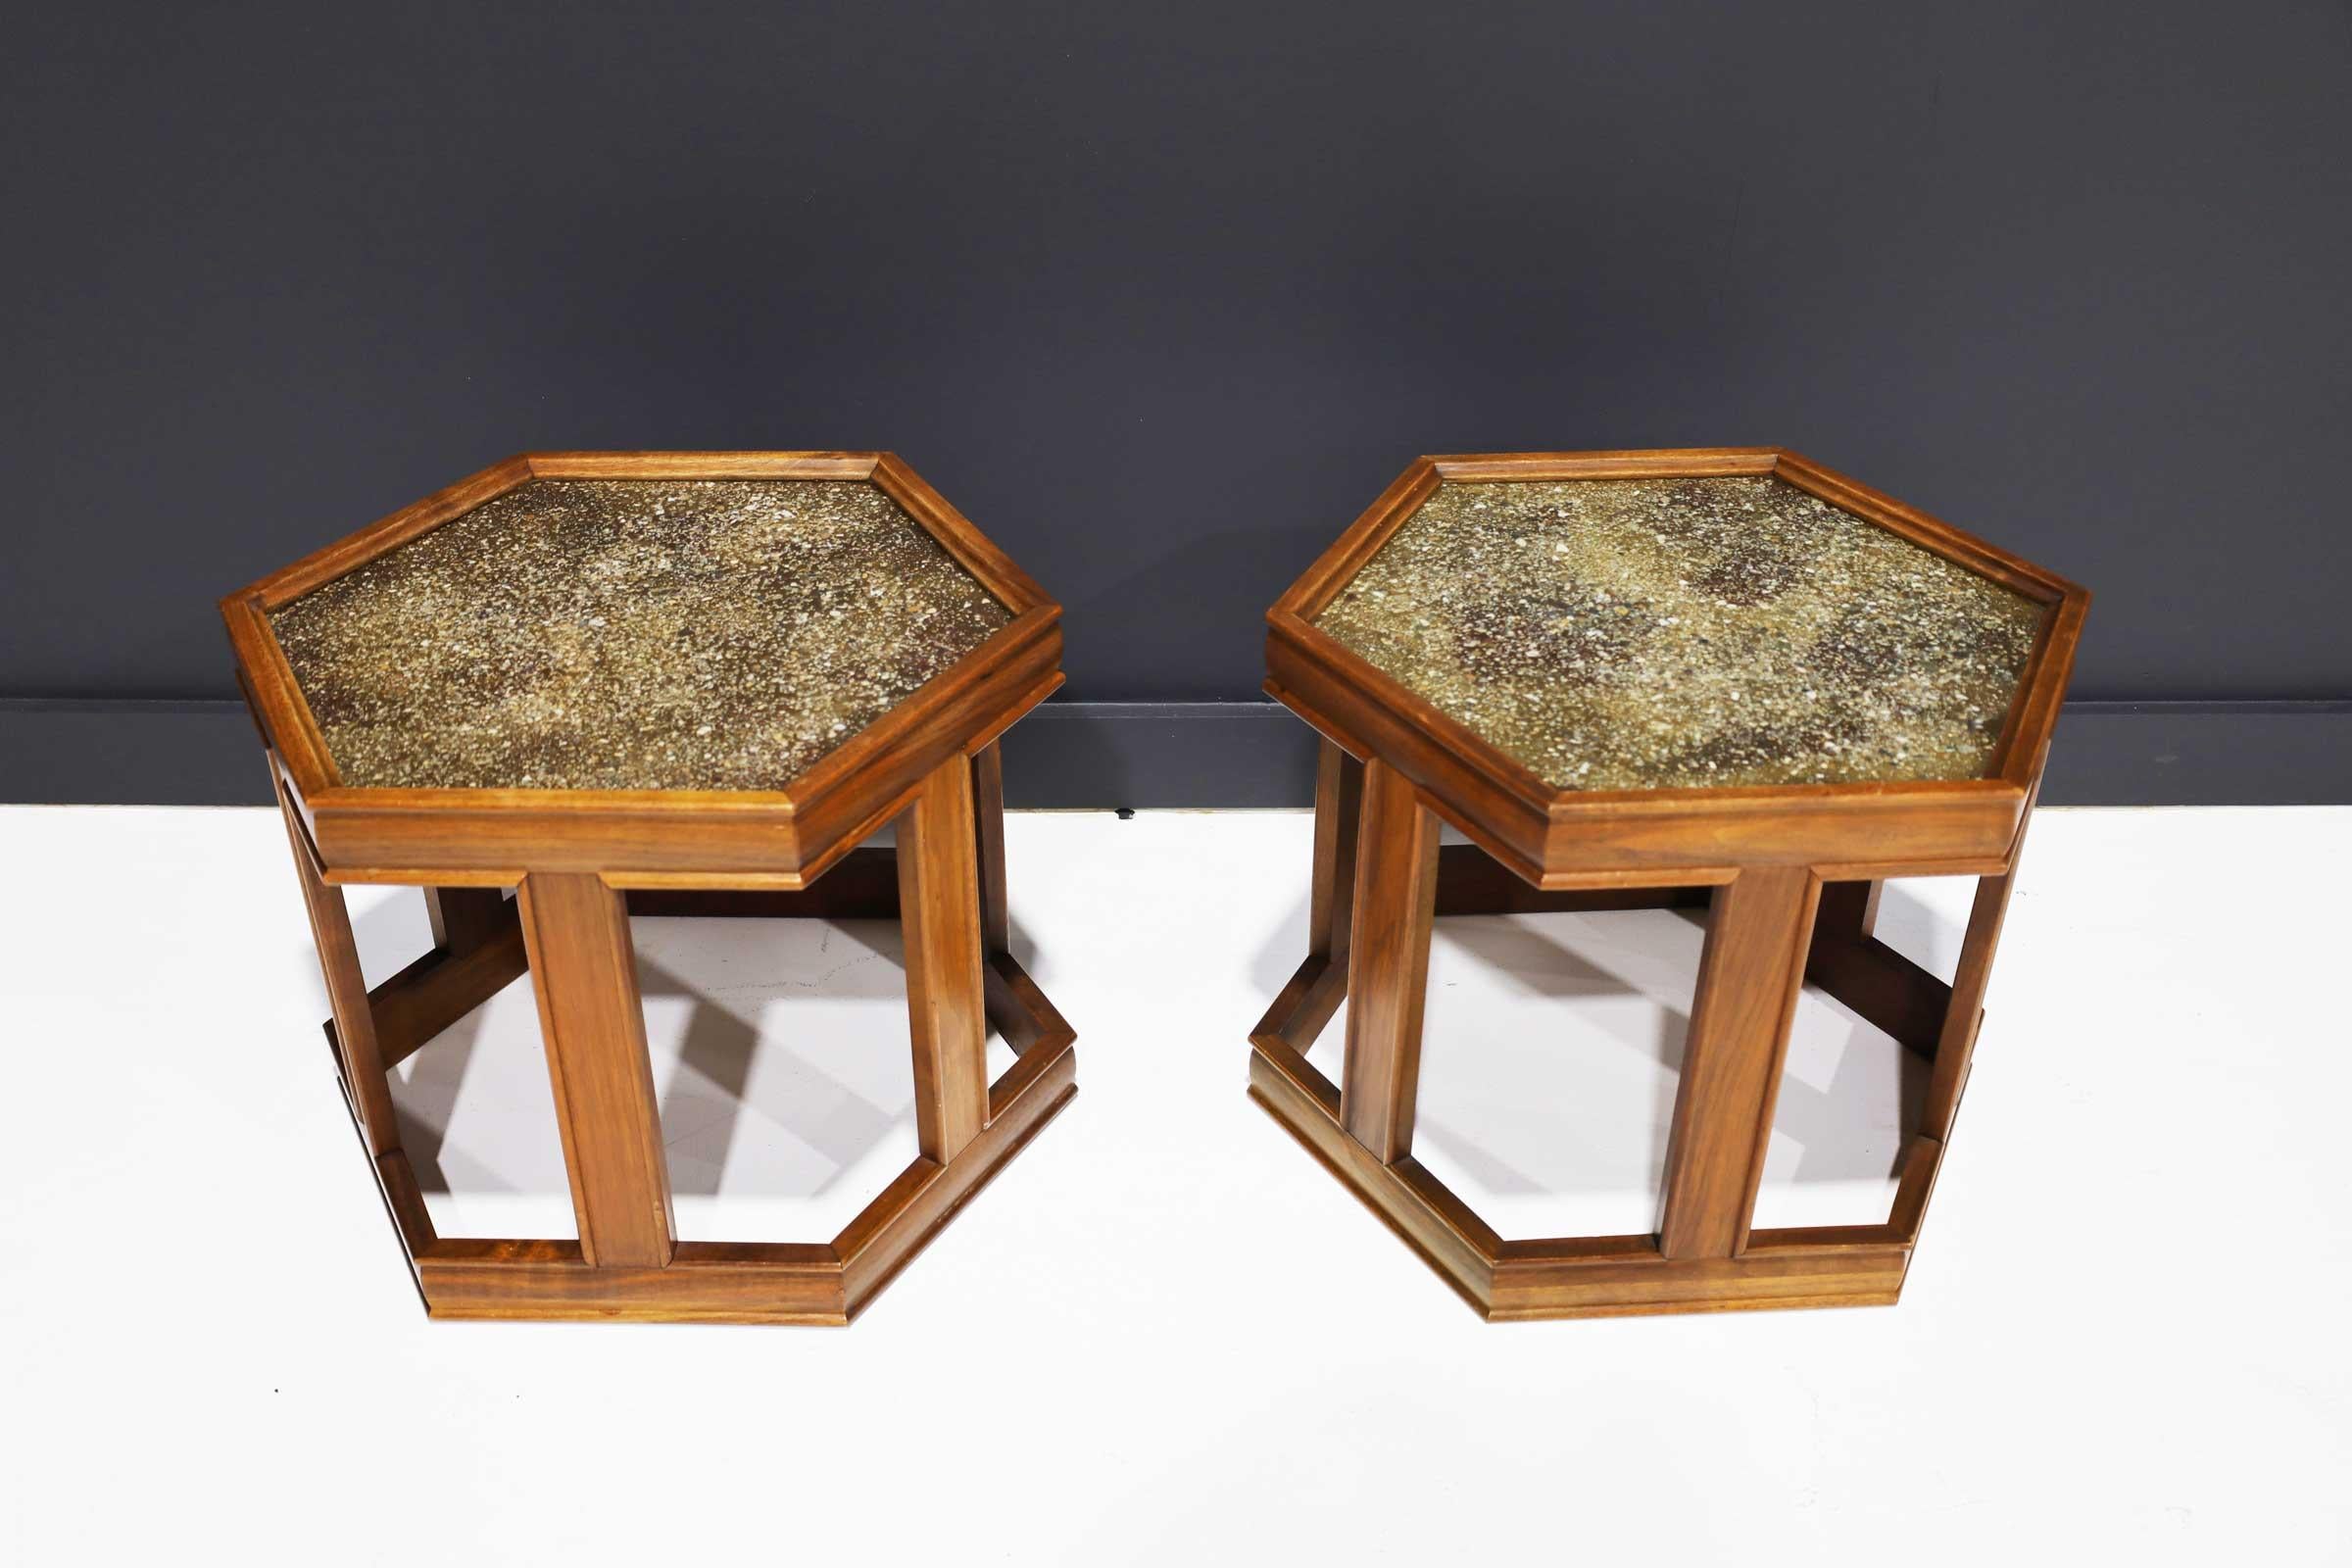 Pair of John Keal for Brown Saltman Hexagon Tables, walnut with inset pebble composite tops under glass, on squared legs joined at the base by stretchers.

Brown Saltman
Brown-Saltman was a collaboration between Dave Saltman and Paul Frankl, a